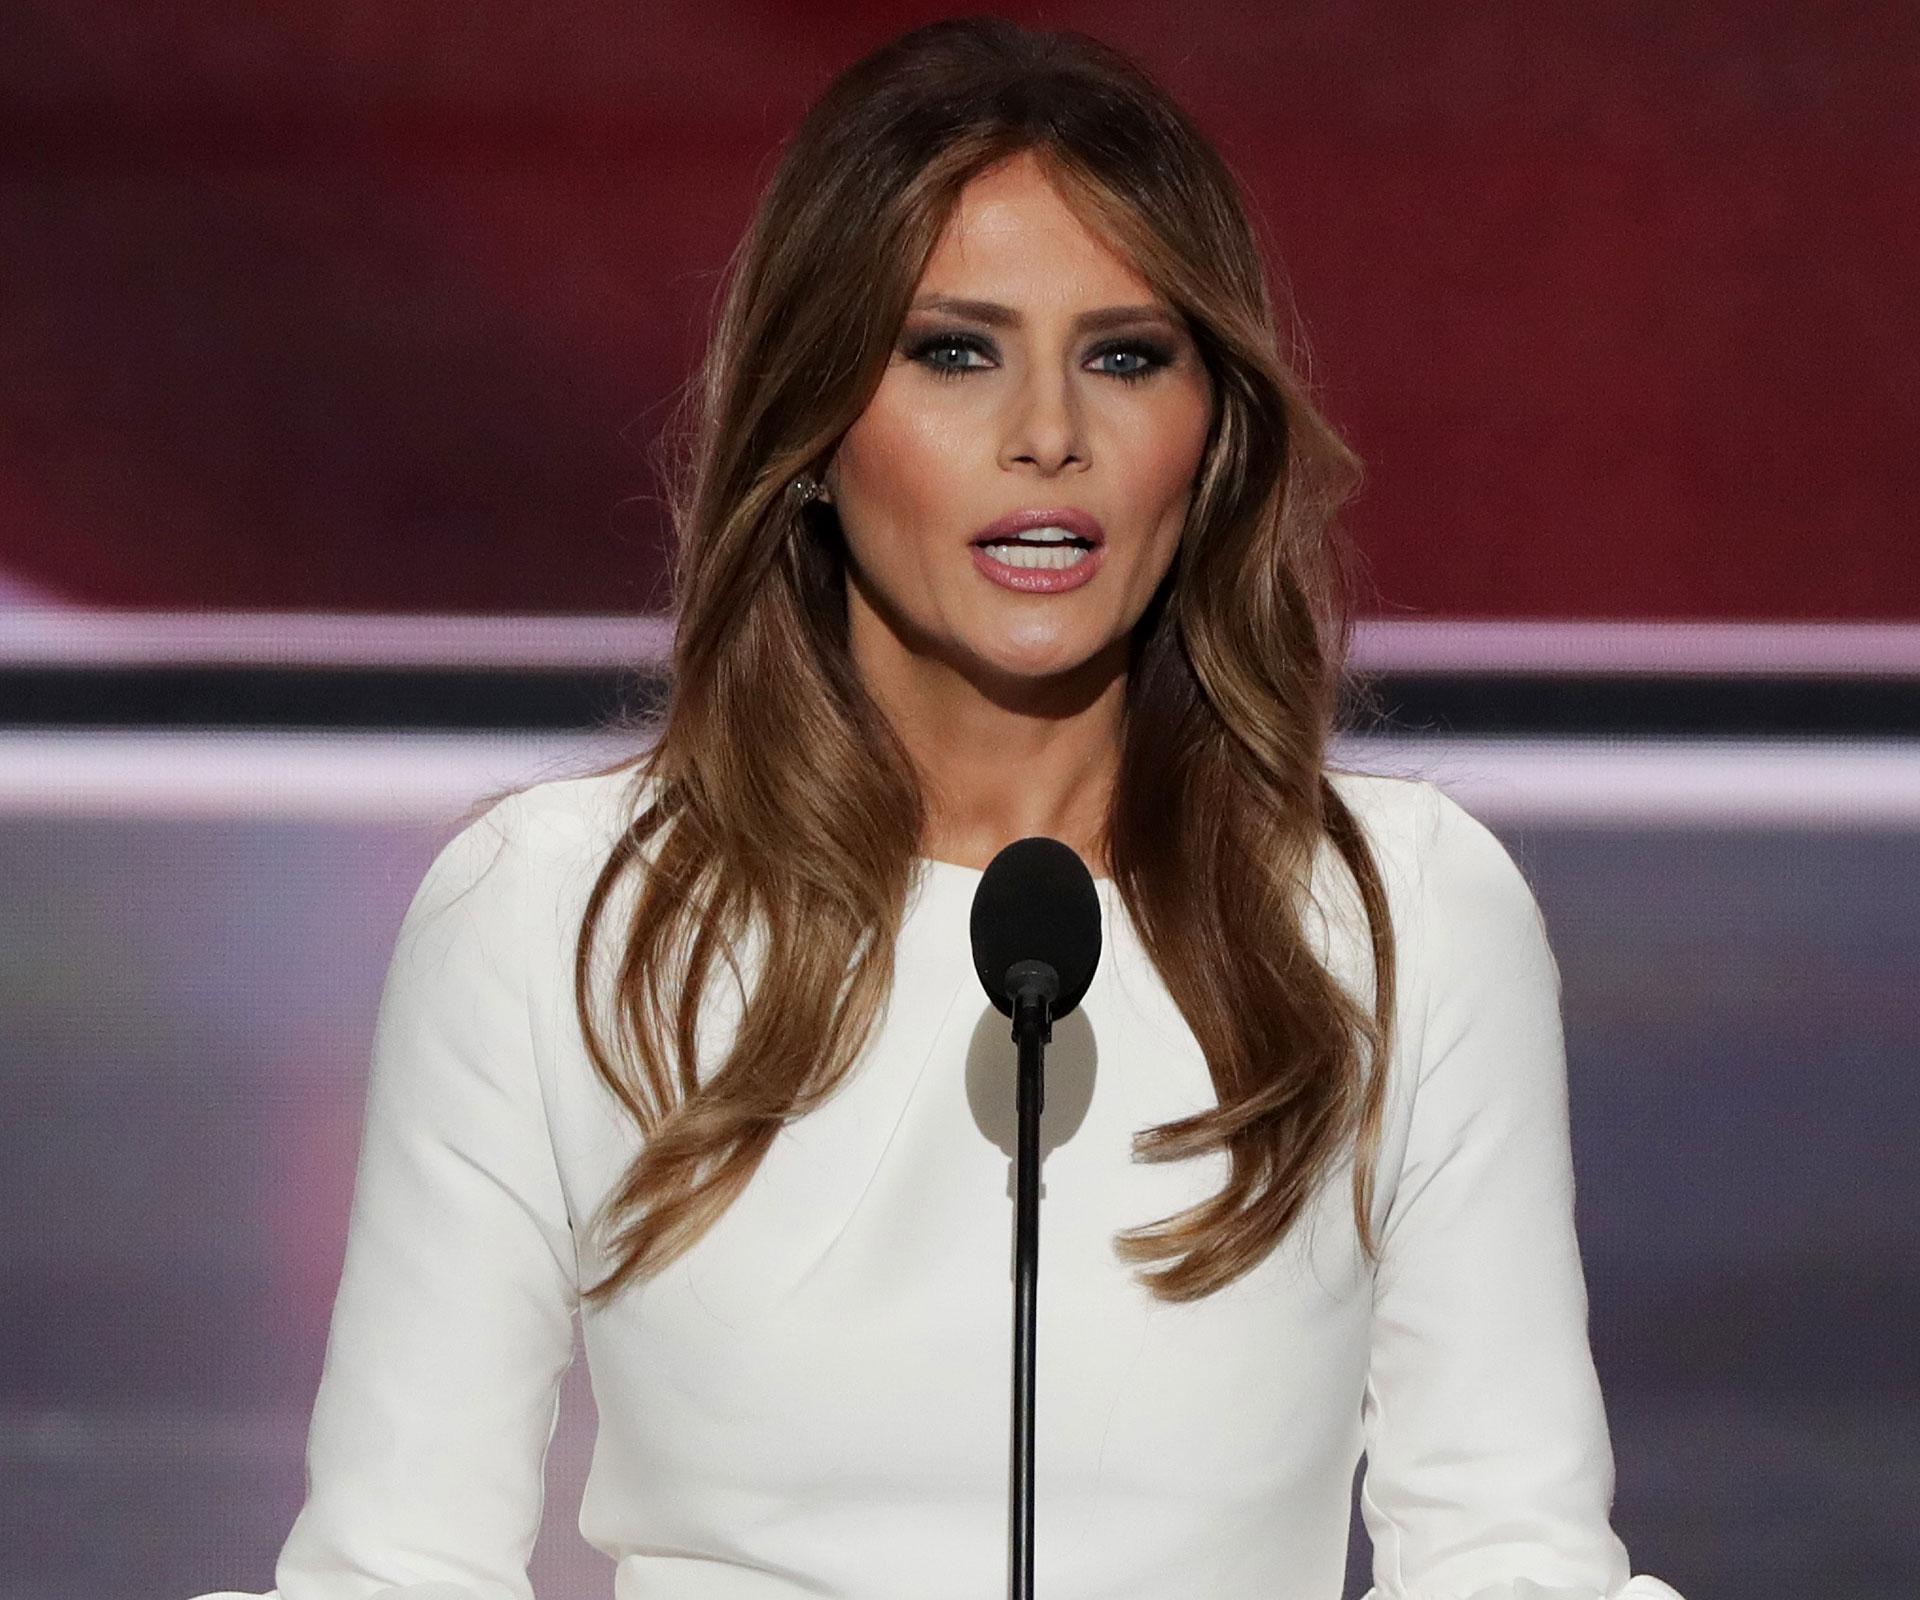 Opinion: ‘Why no woman should celebrate Melania Trump’s nudes’